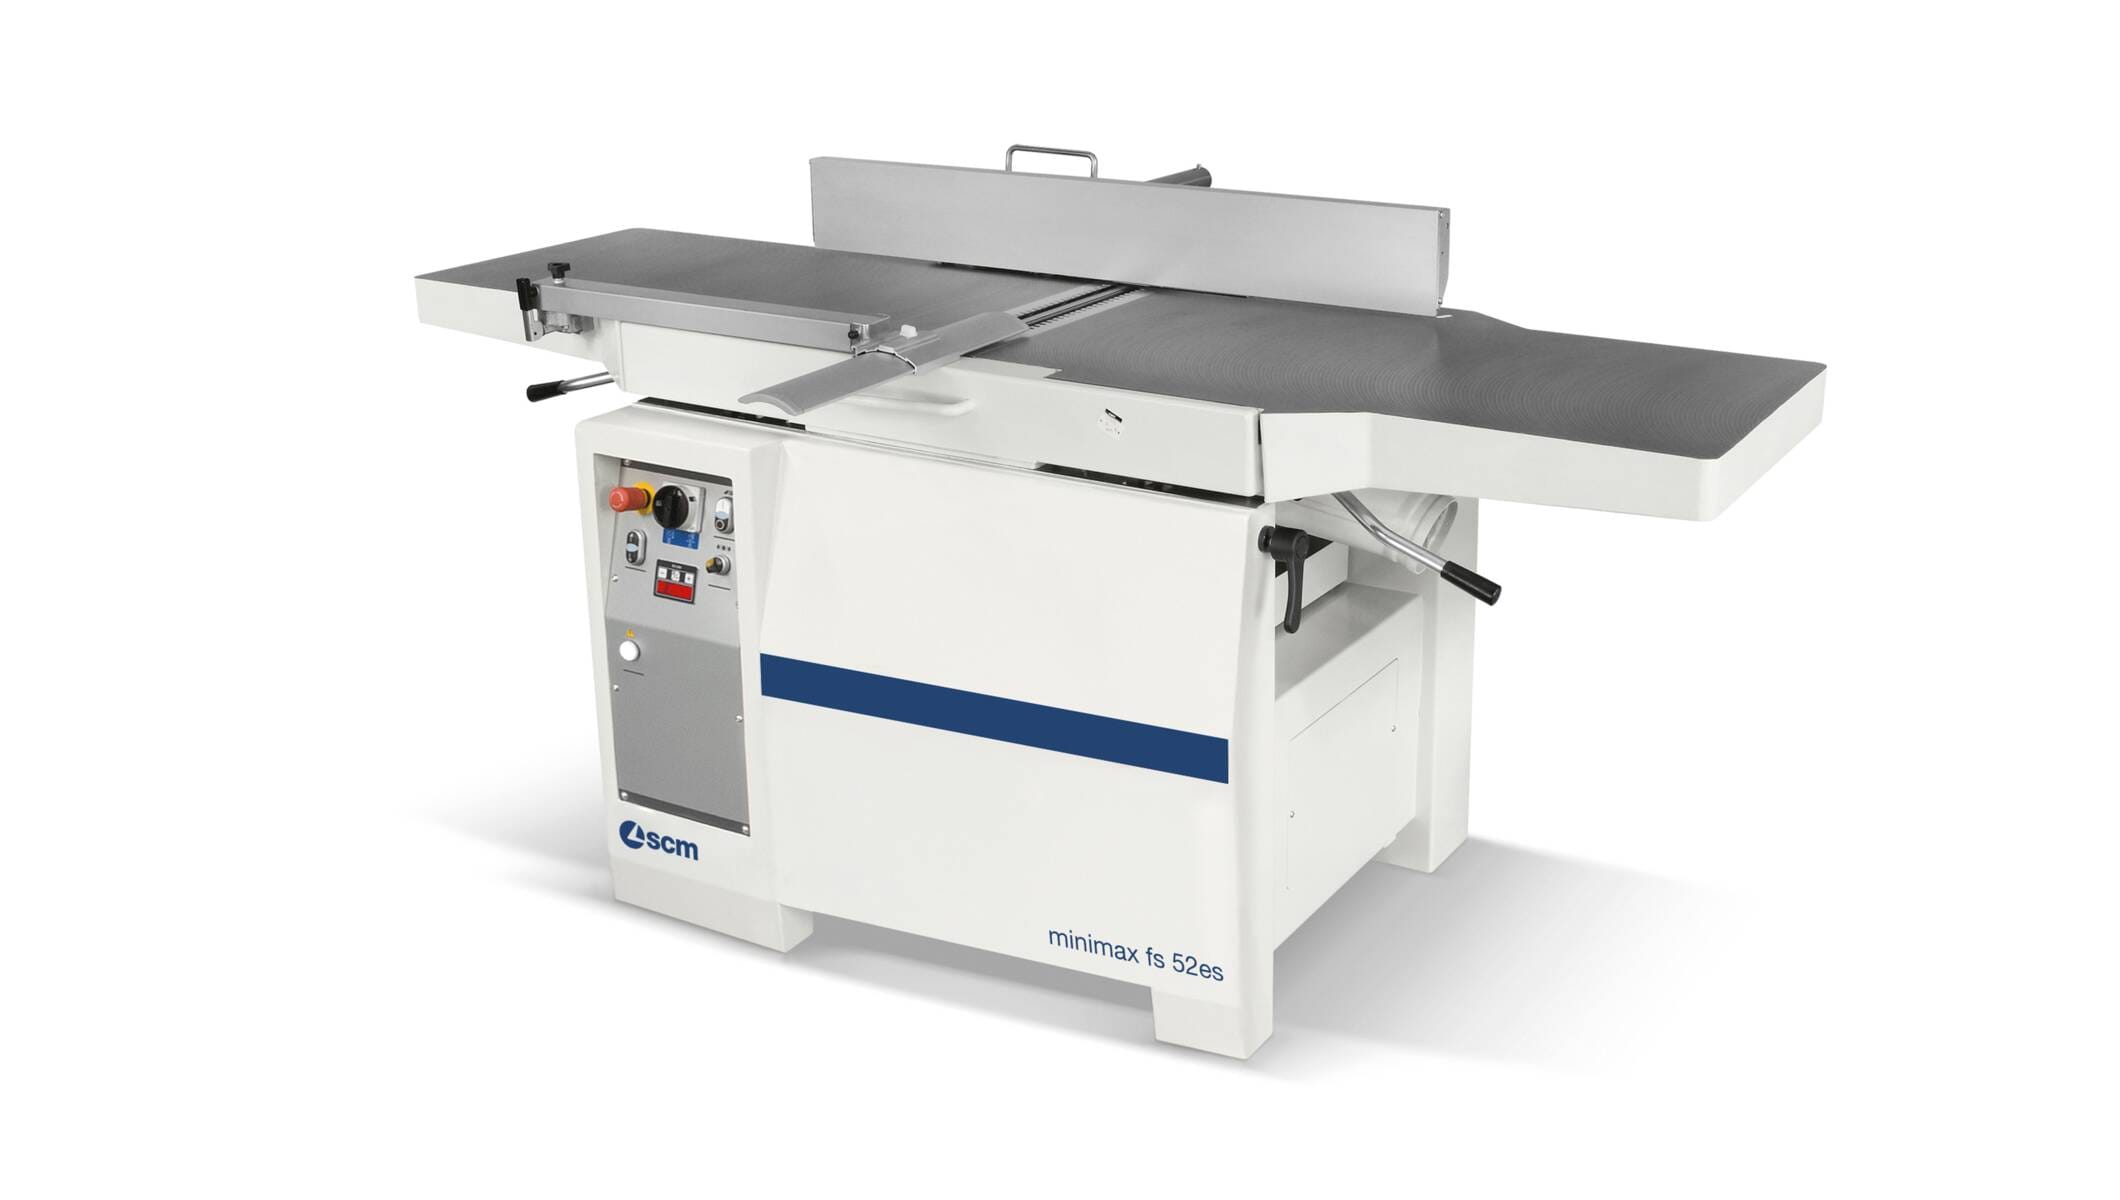 Joinery machines - Jointer/Planer Combination - minimax fs 52es